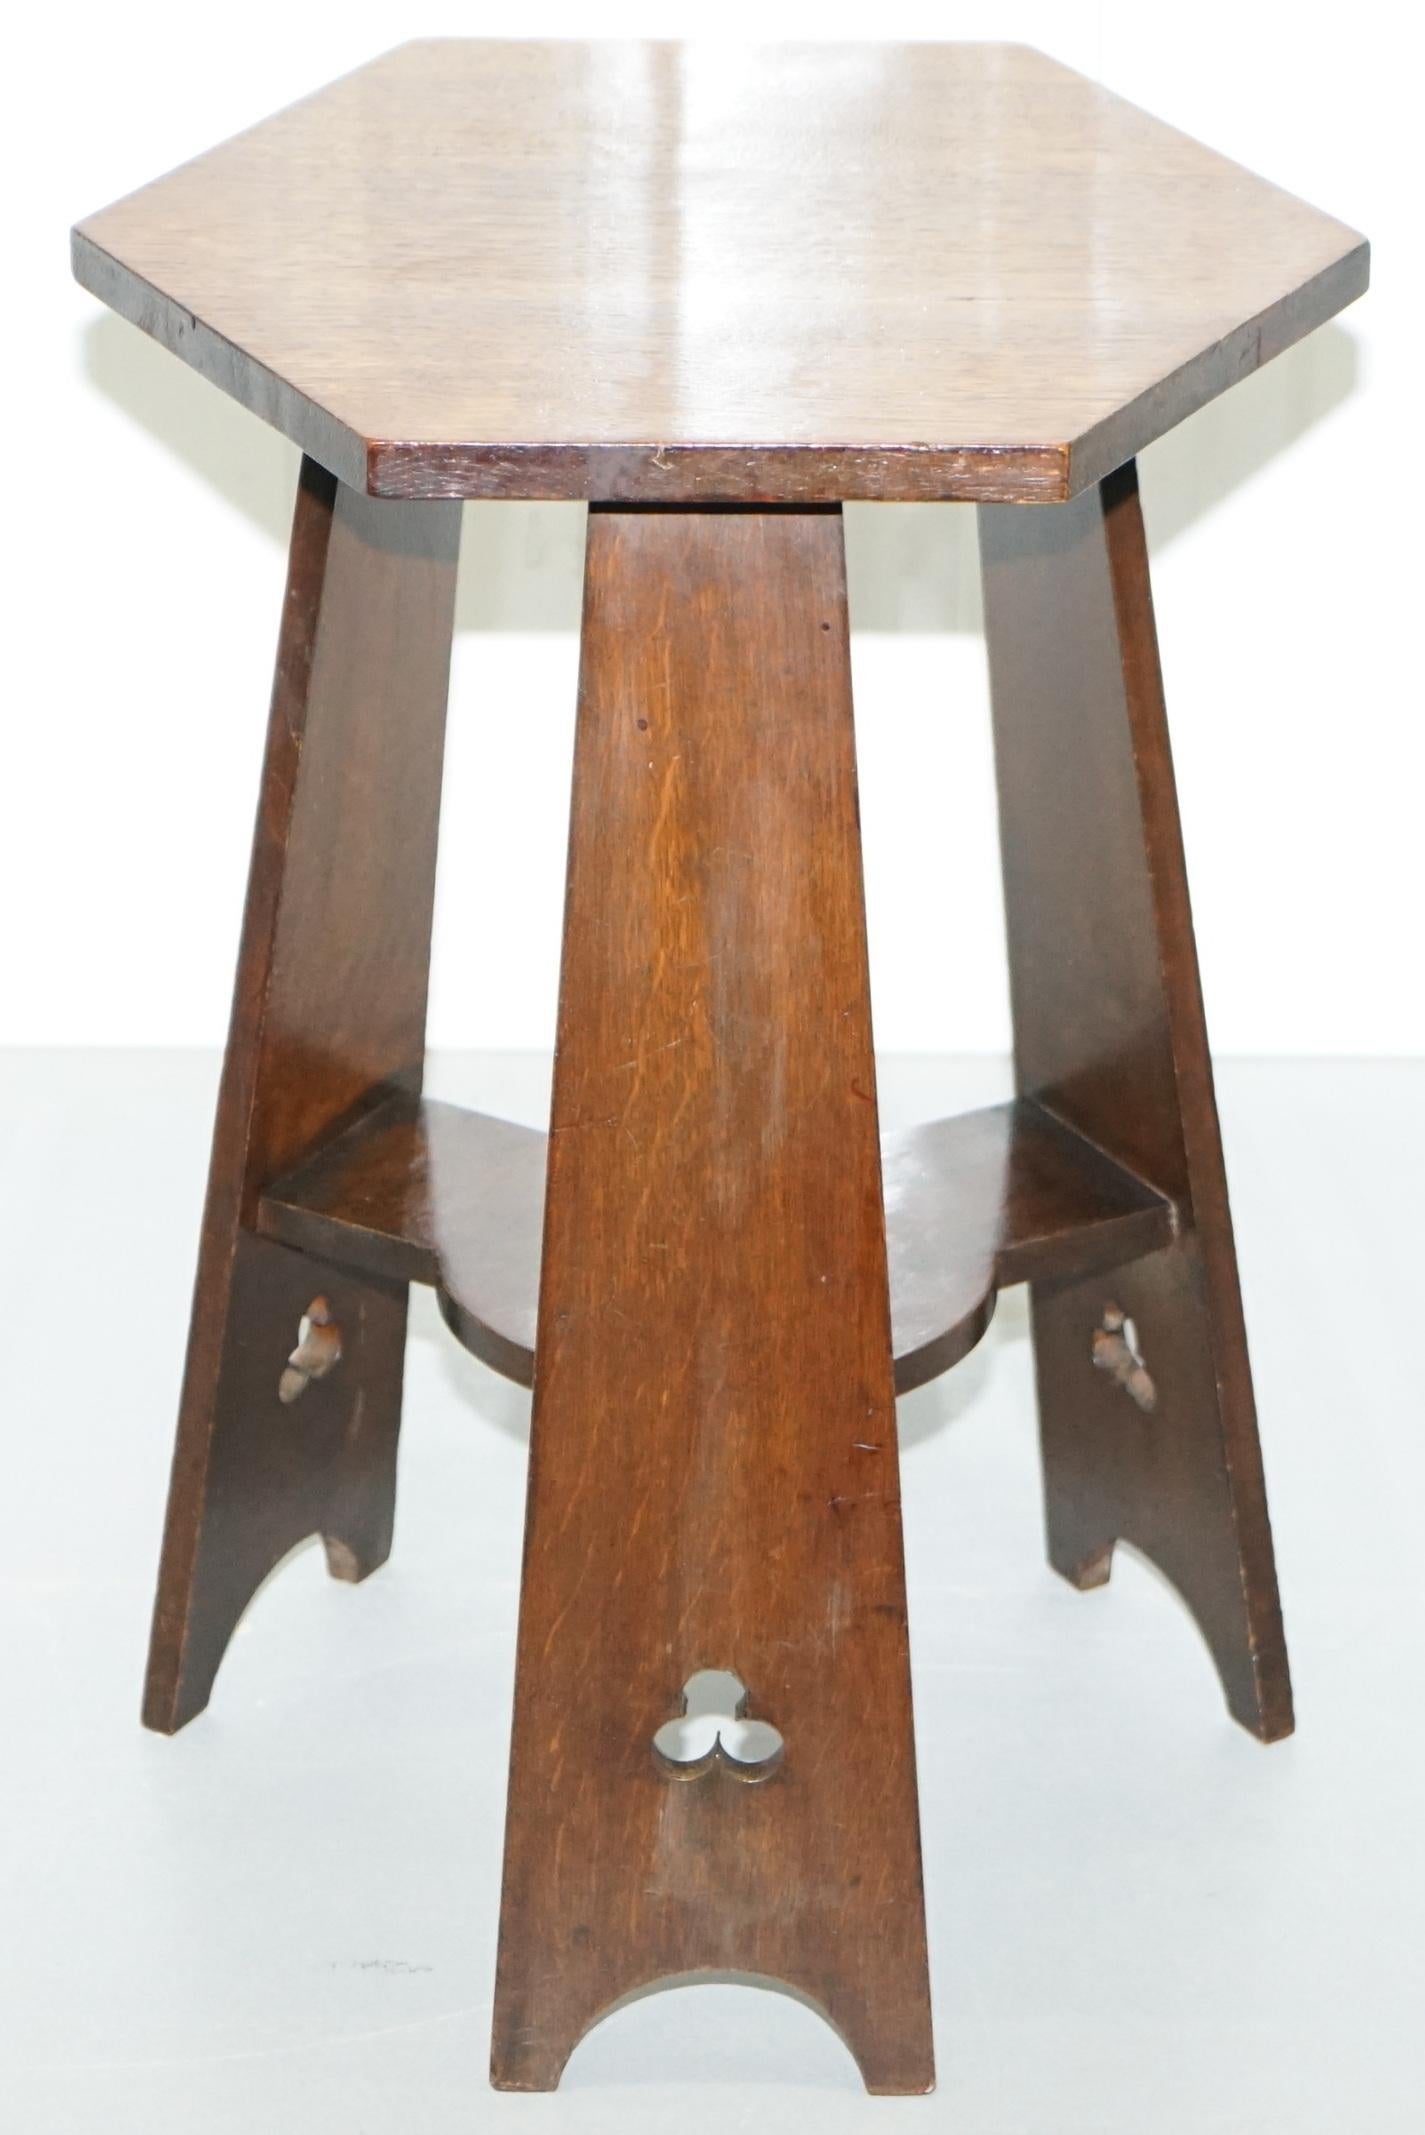 We are delighted to offer for sale this original pair of Liberty’s London Horsa Arts & Crafts occasional side end lamp wine tables

A good looking and well-made pair, they are a very traditional Liberty’s arts and crafts style, very popular and